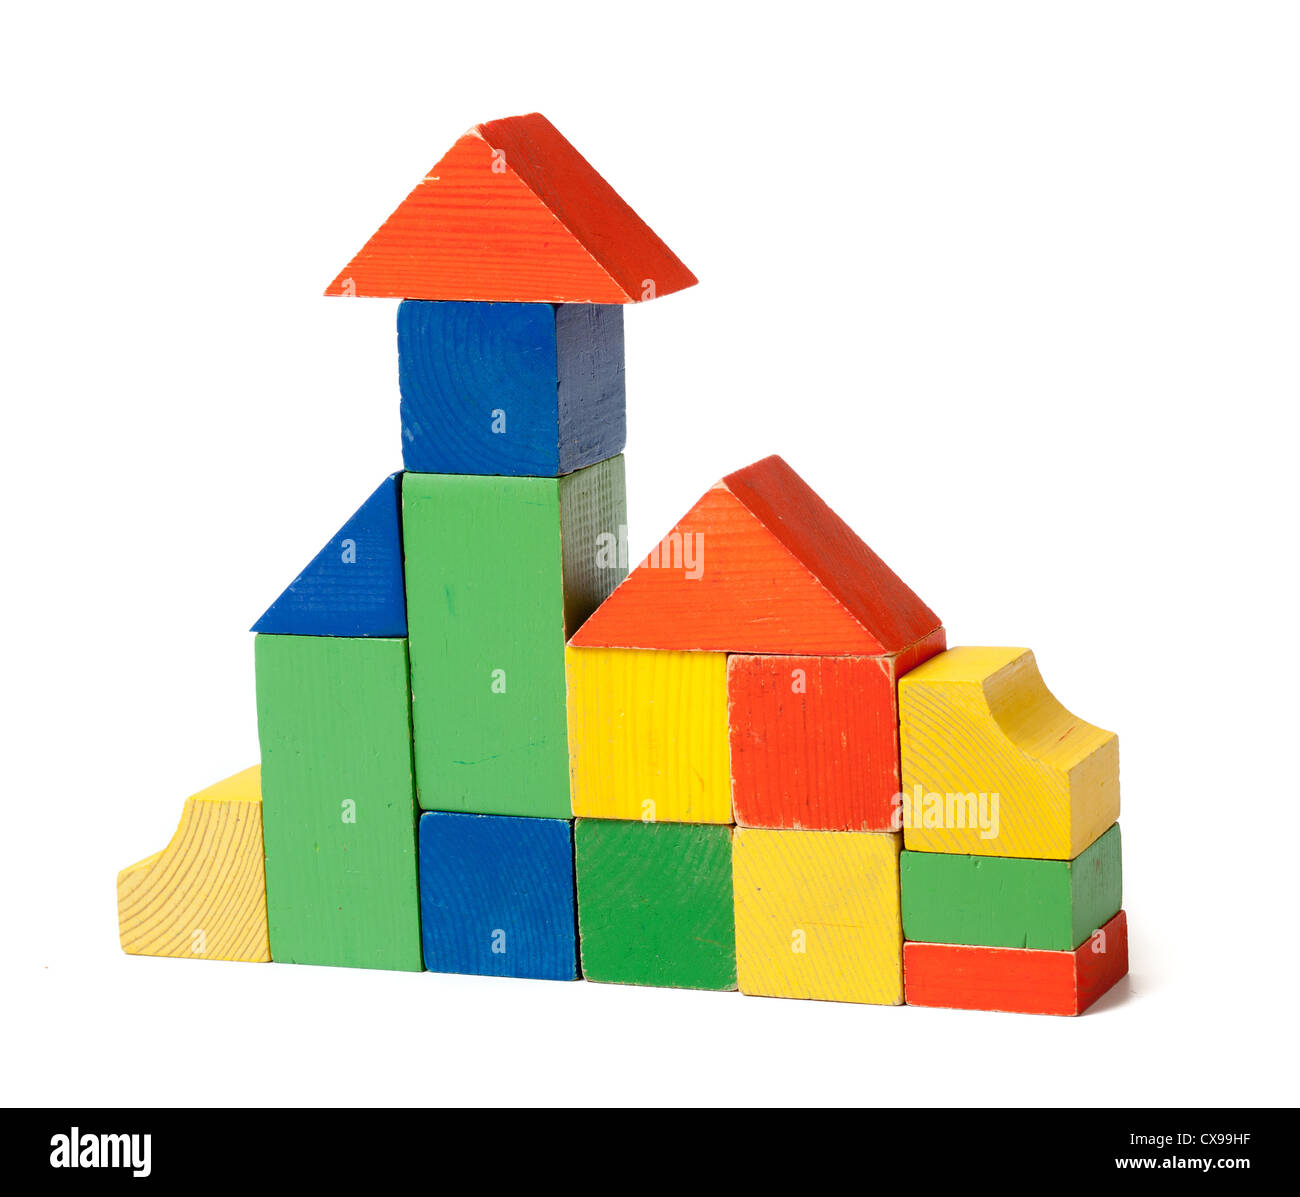 Simple house made from colorful wooden building blocks Stock Photo